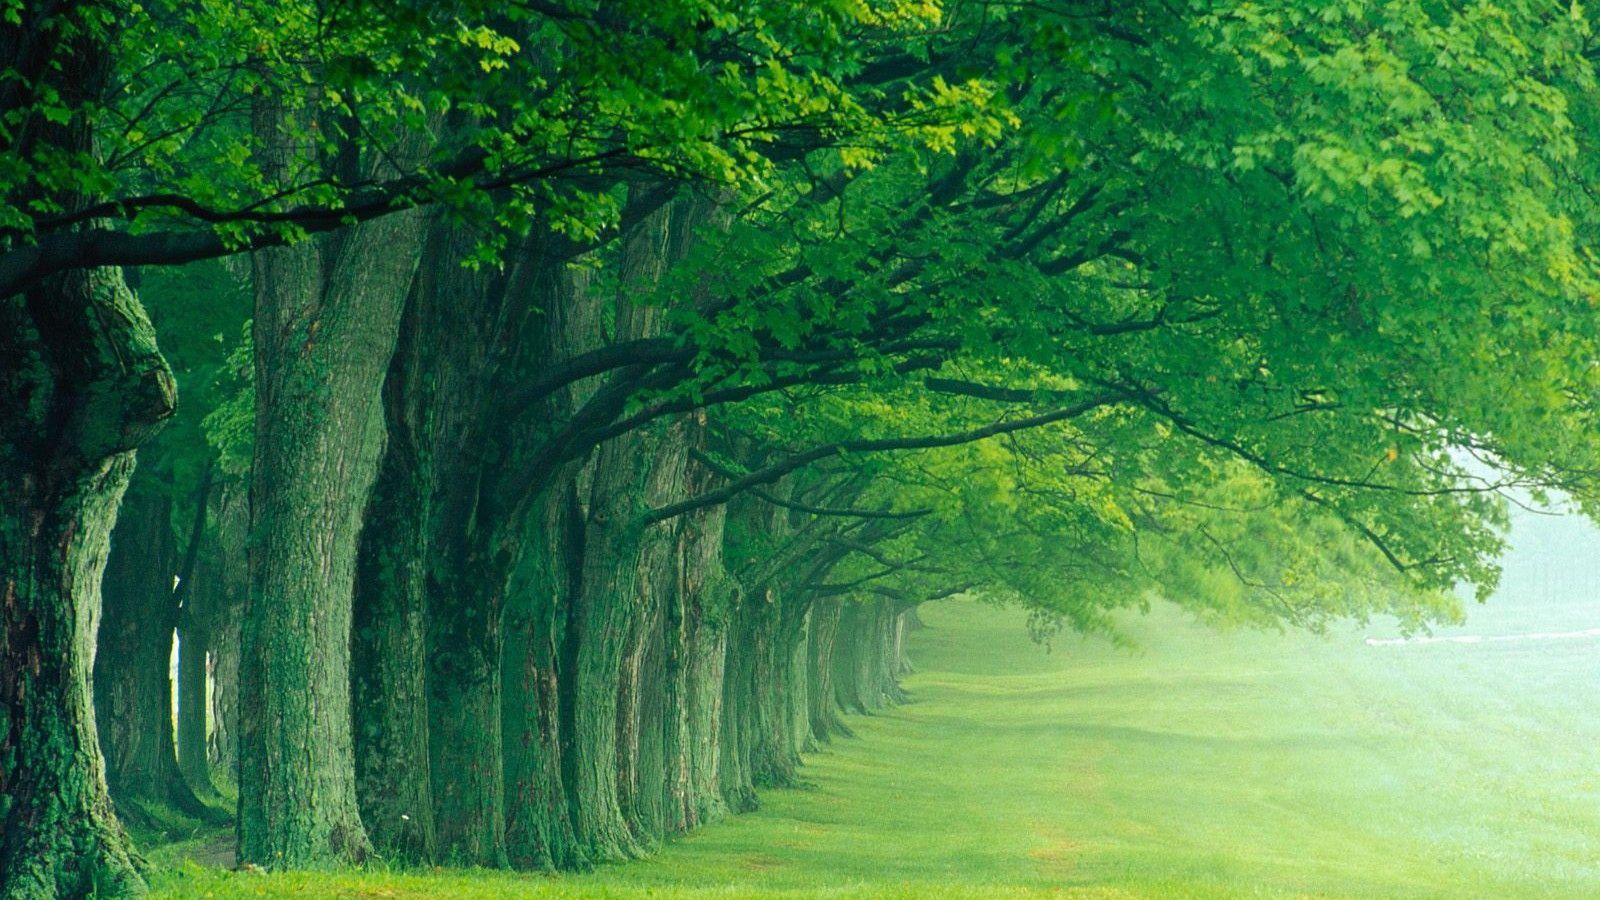 All Green Trees in One Line and Living Toward One Direction, a Favorable Natural Scene, Great for Eye and Environment Protection